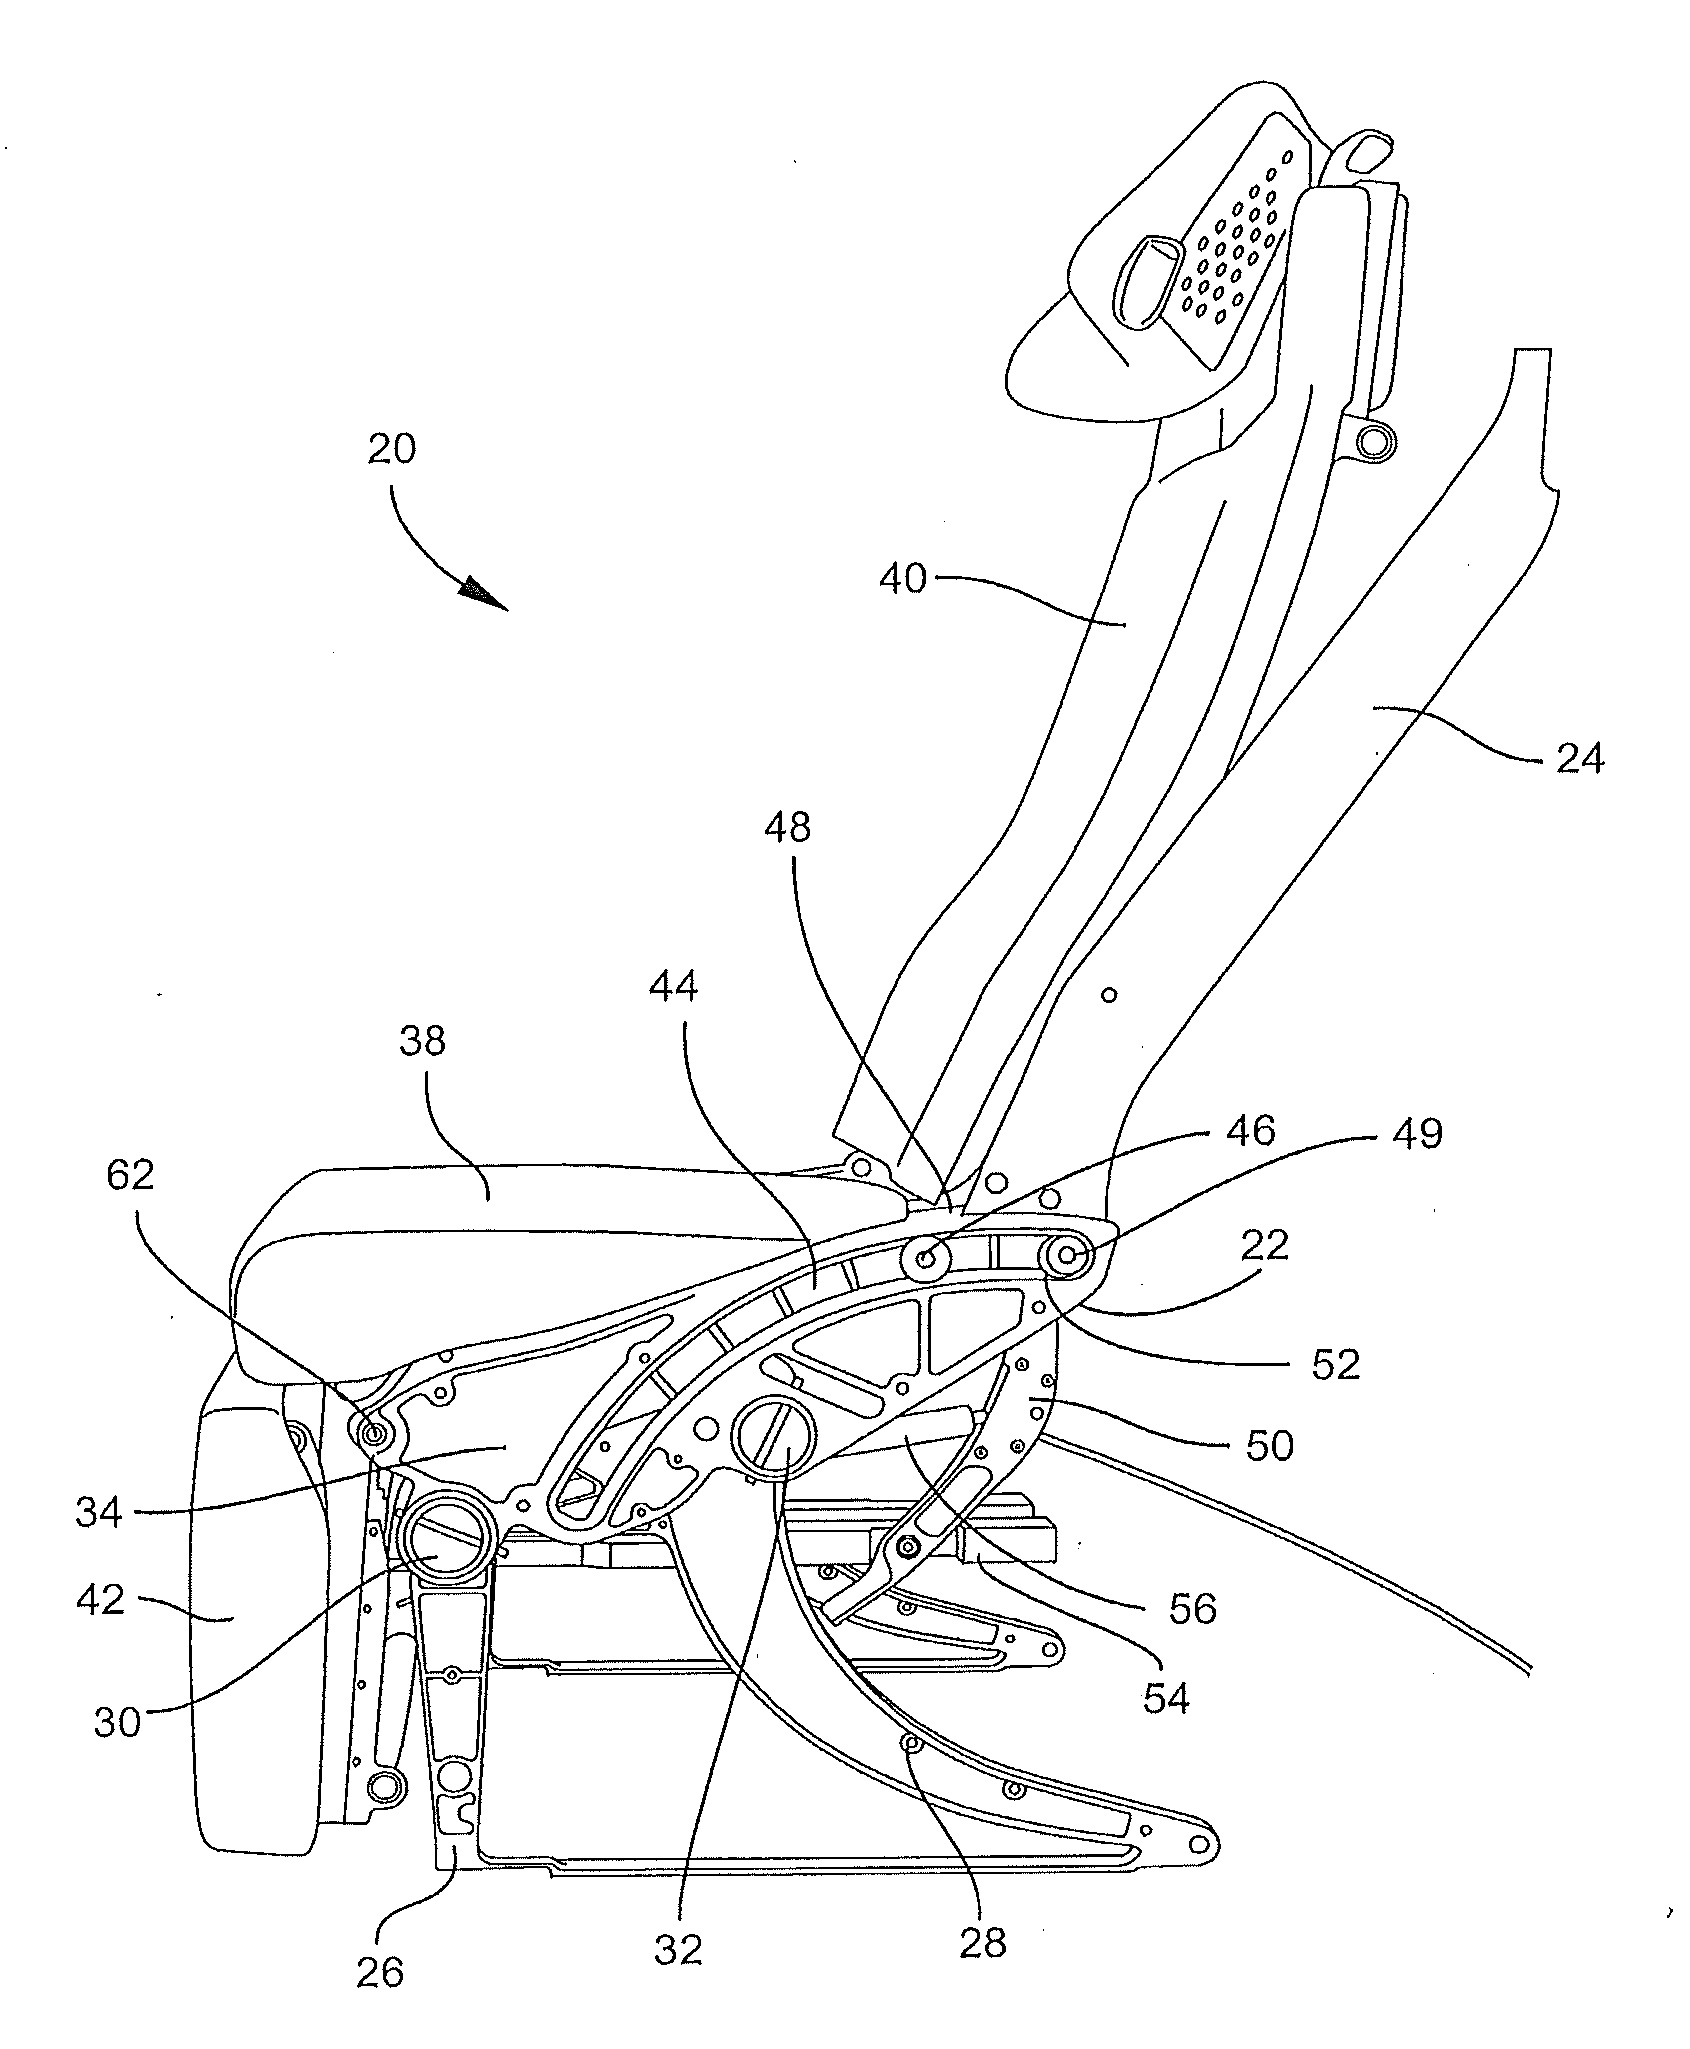 Cradle recline mechanism for fixed-shell aircraft seat